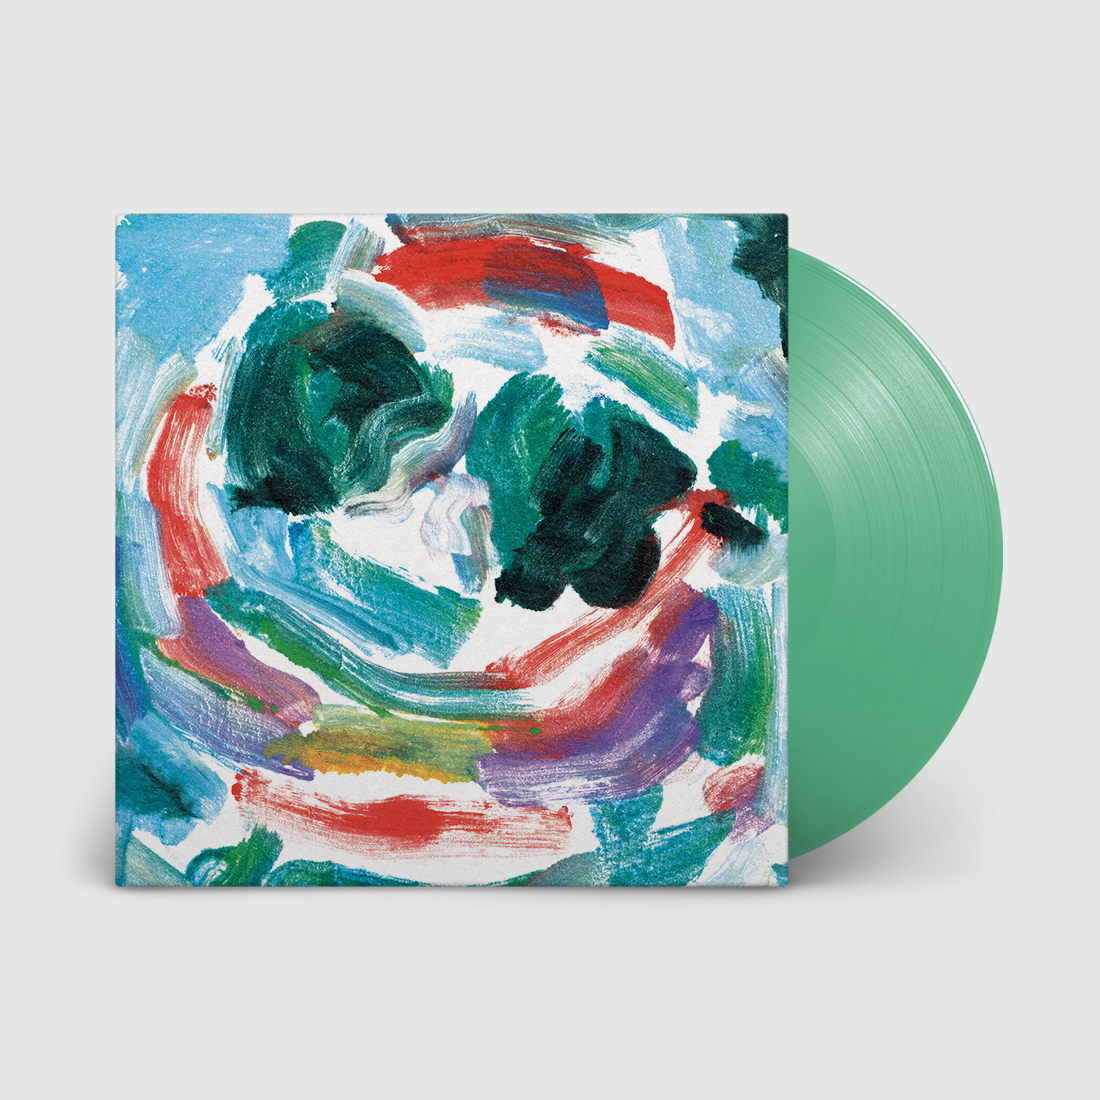 Contact: Limited Edition Mint Green Vinyl LP